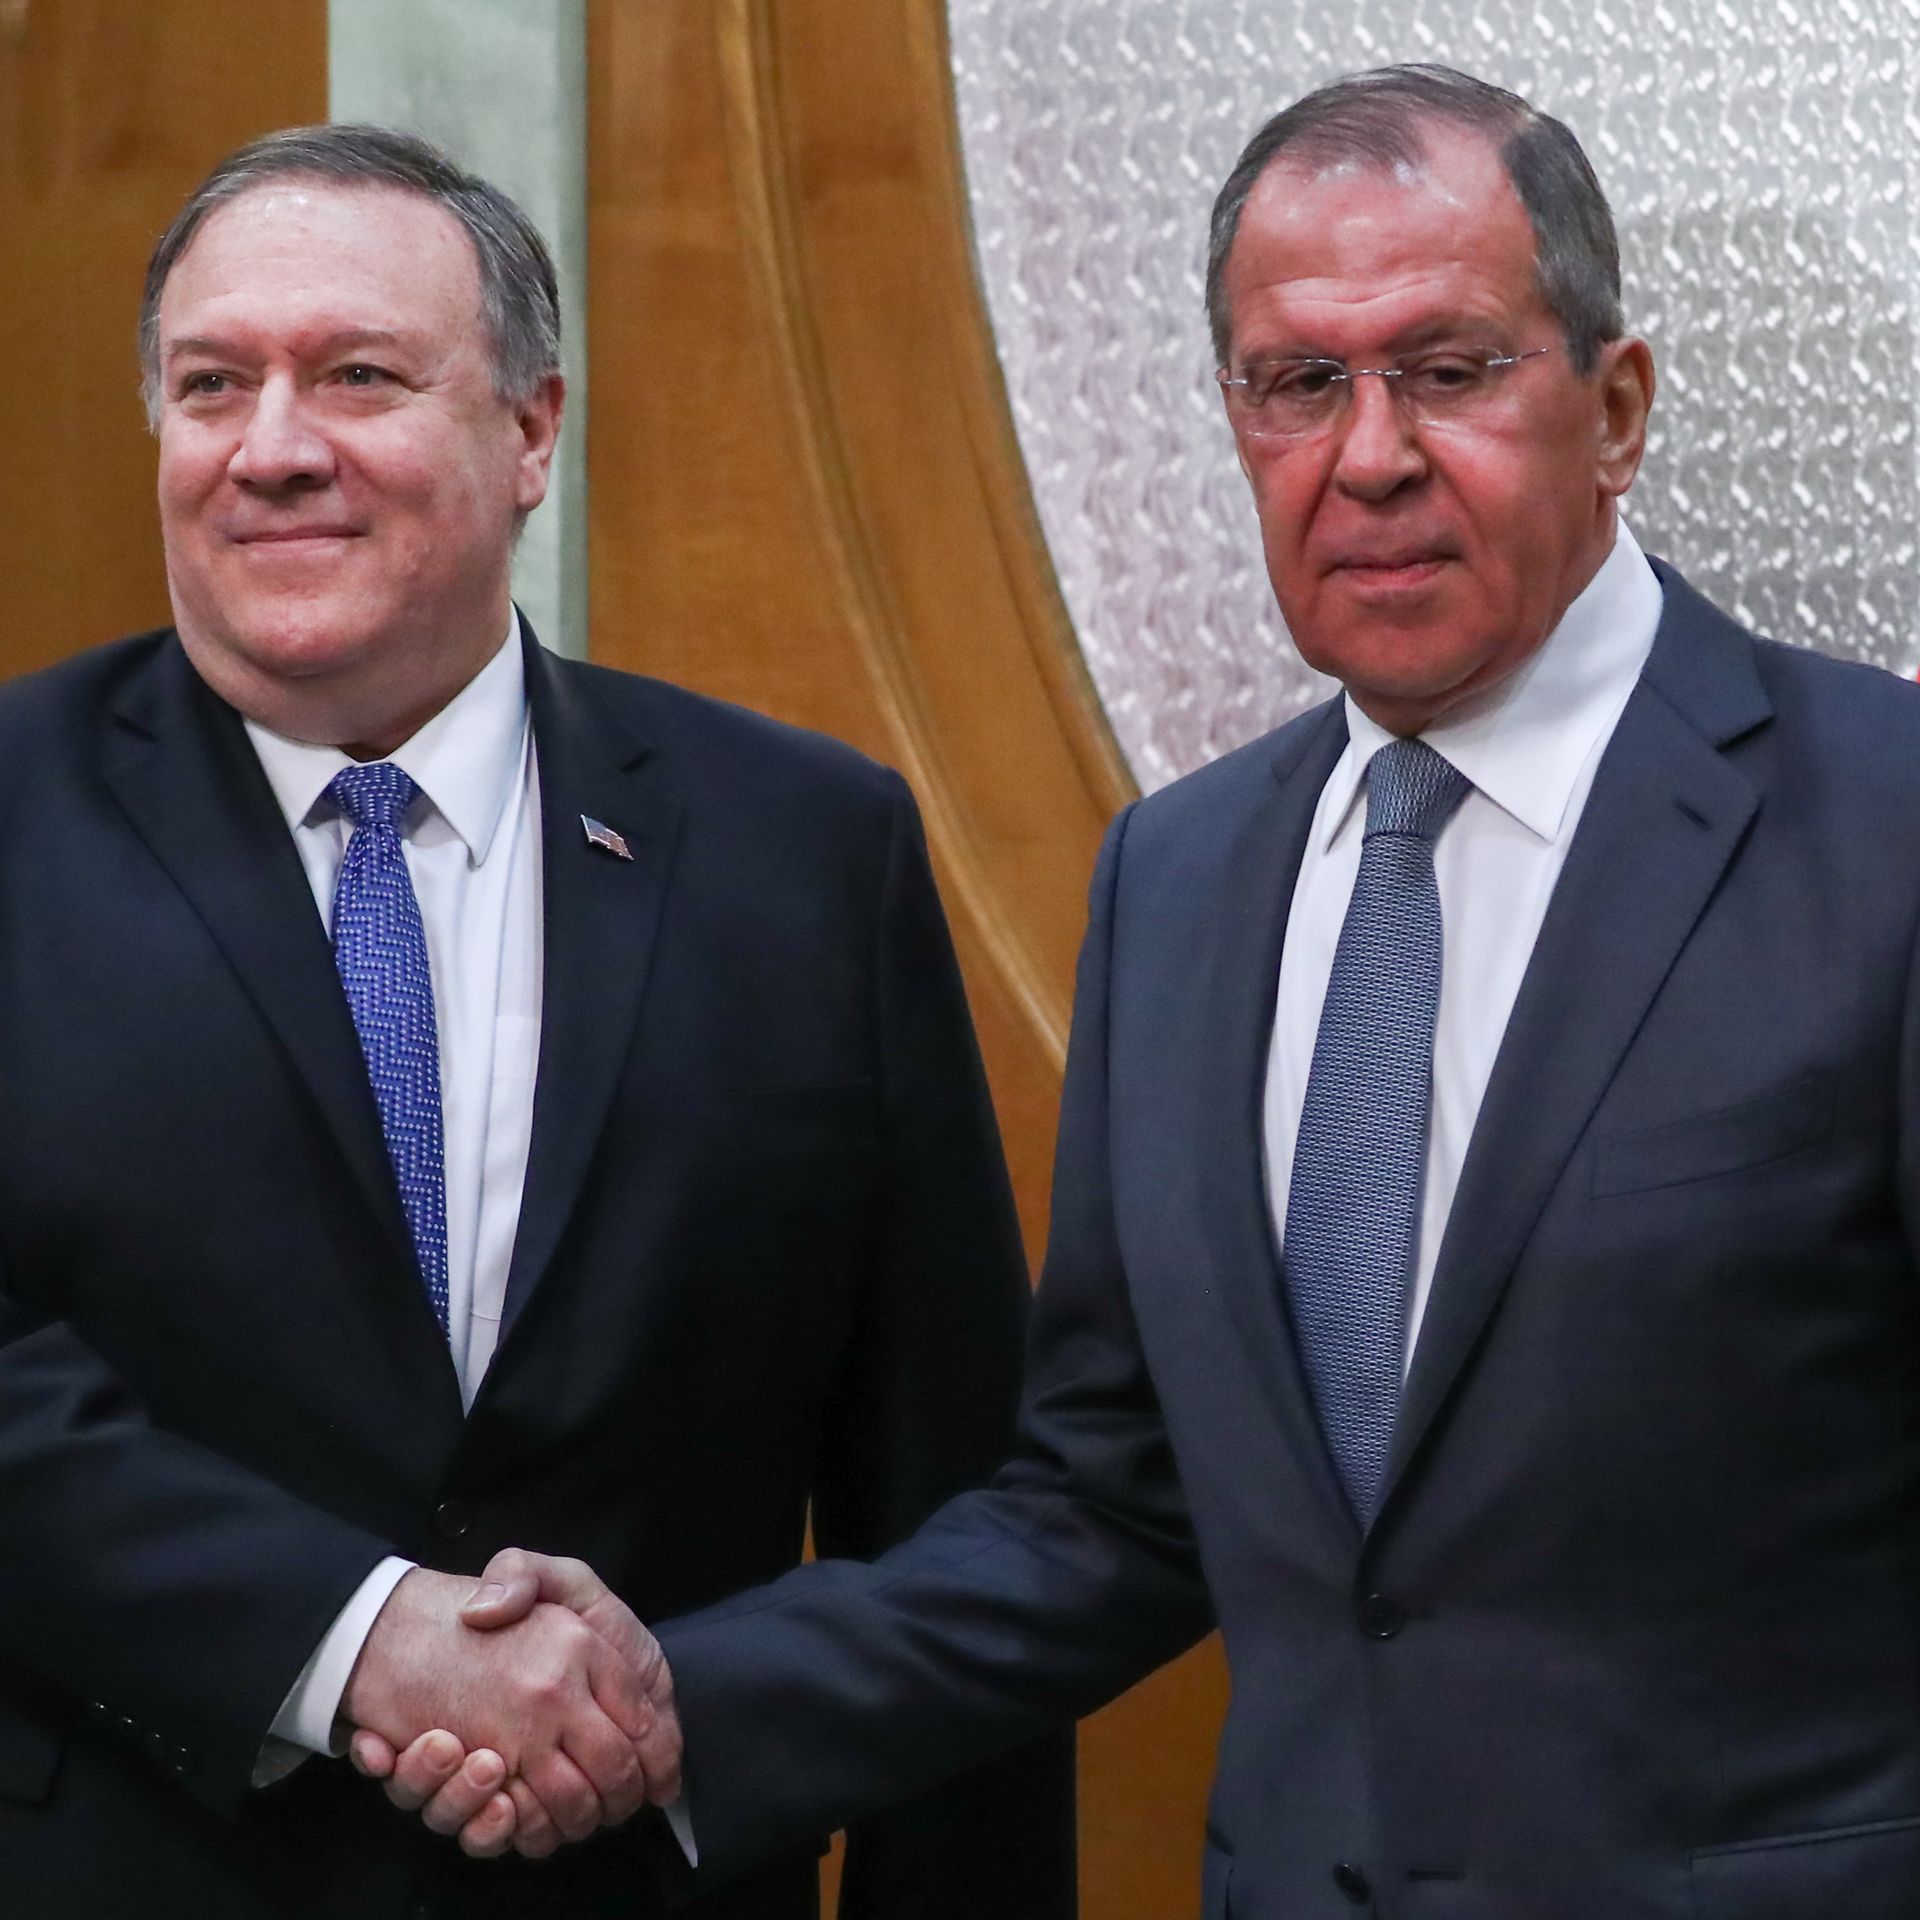 Mike Pompeo and Sergey Lavrov